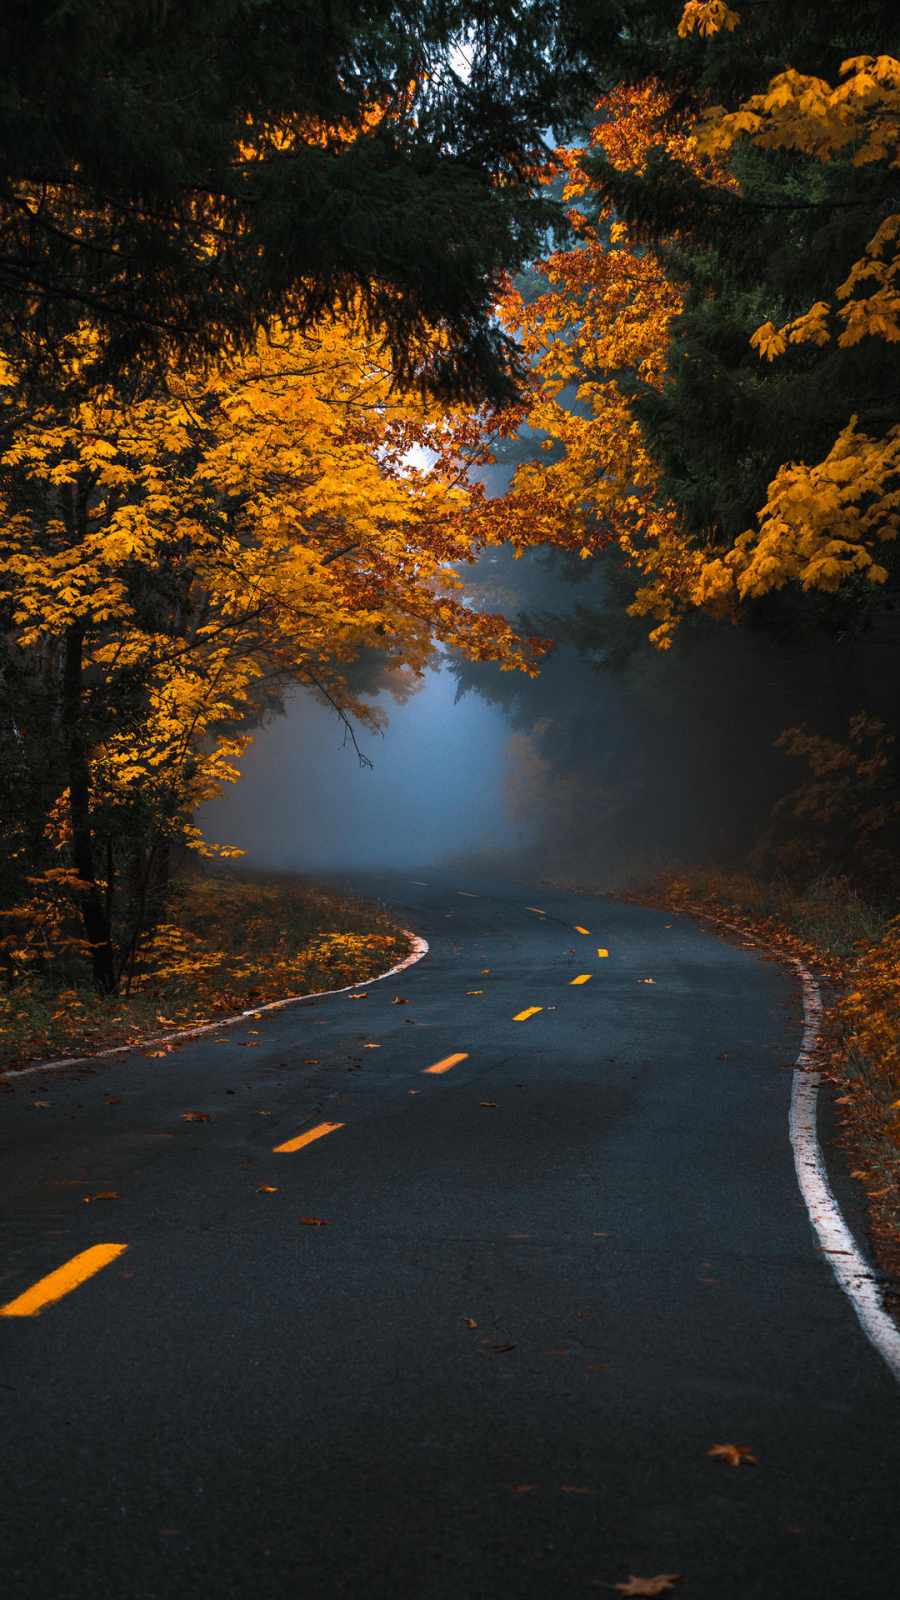 A road with trees on both sides - Fog